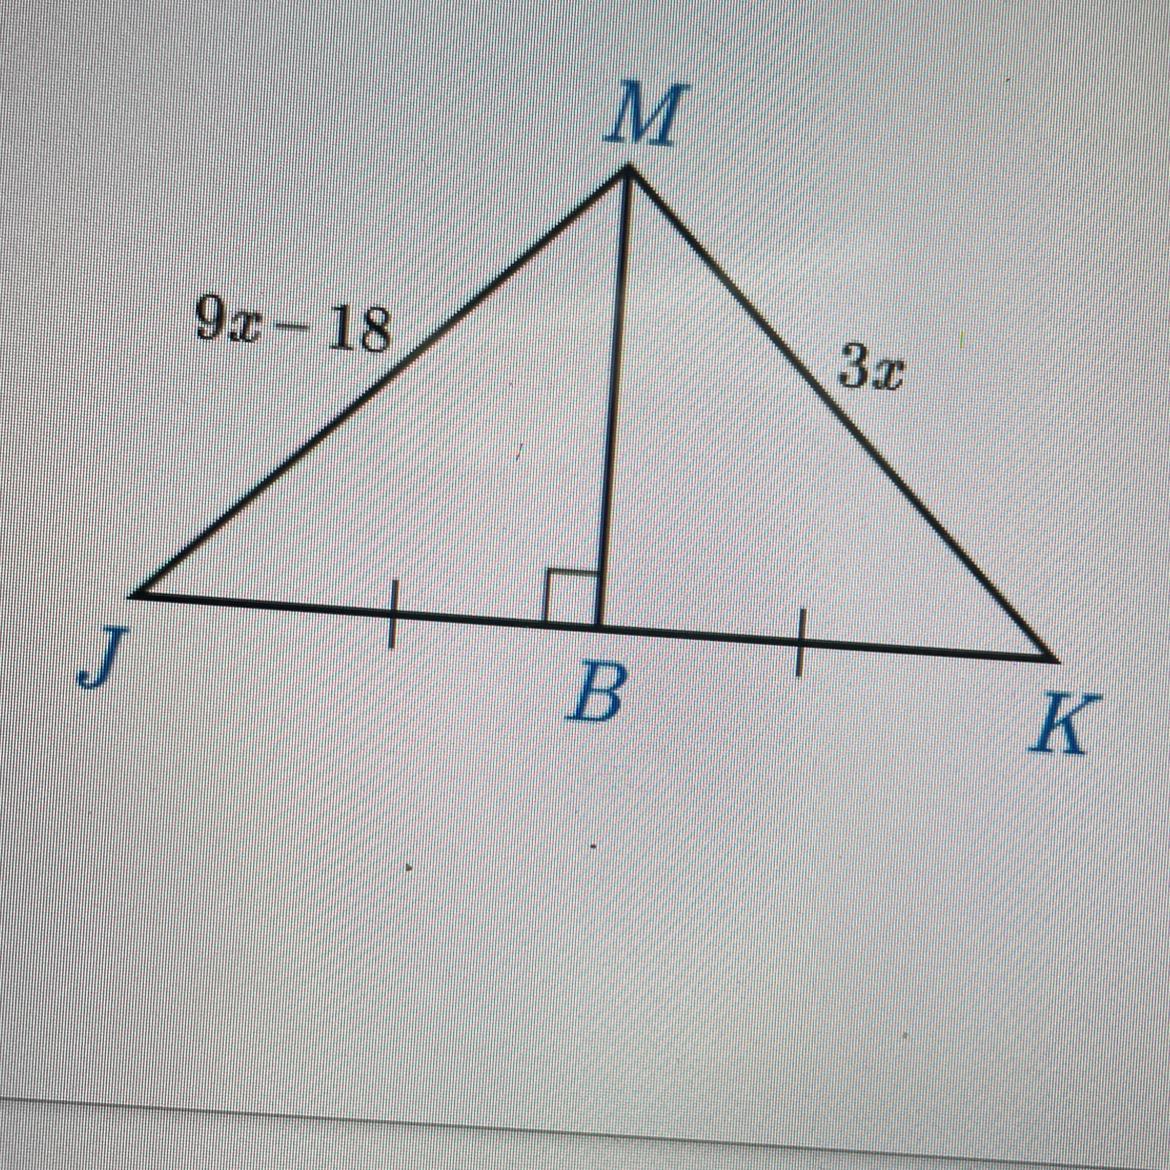 J9x-18,MB- Part A What Is The Value Of X? (1 Point)Ox=3Ox=18Ox=30Ox=93xPart B Find JM In The Previous